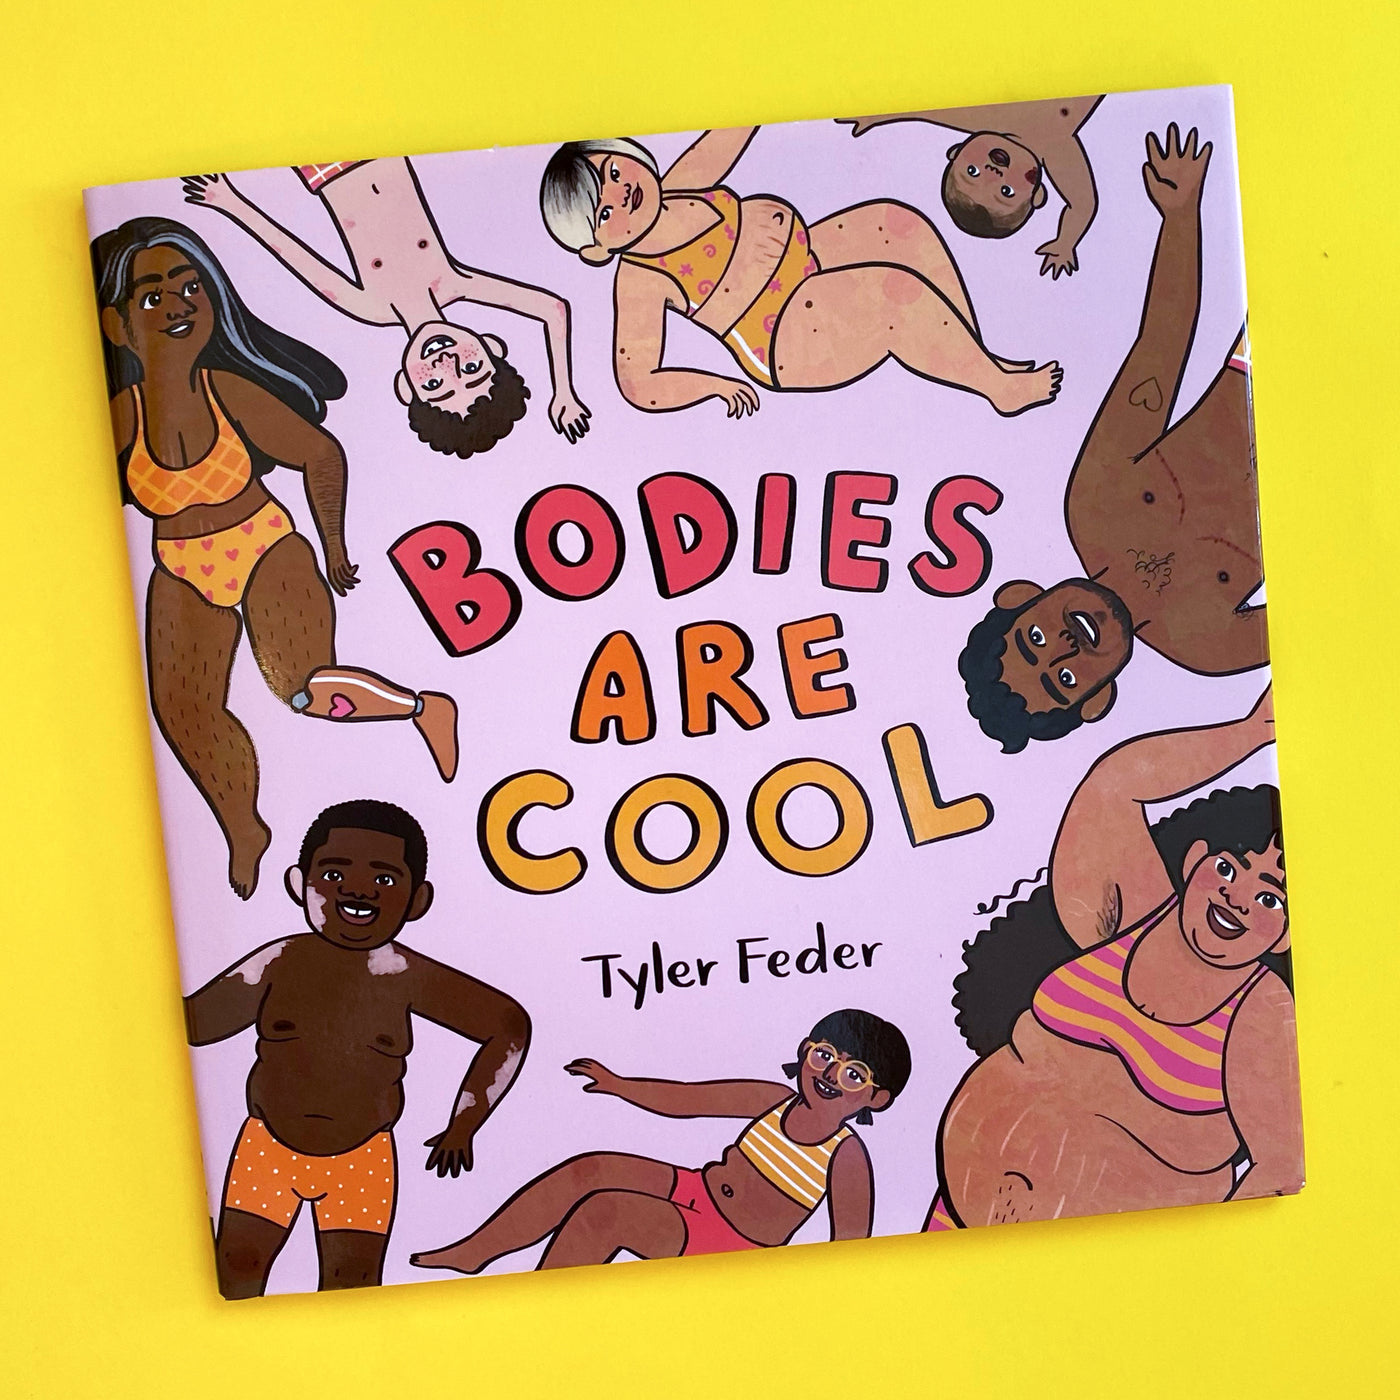 Bodies are Cool by Tyler Feder